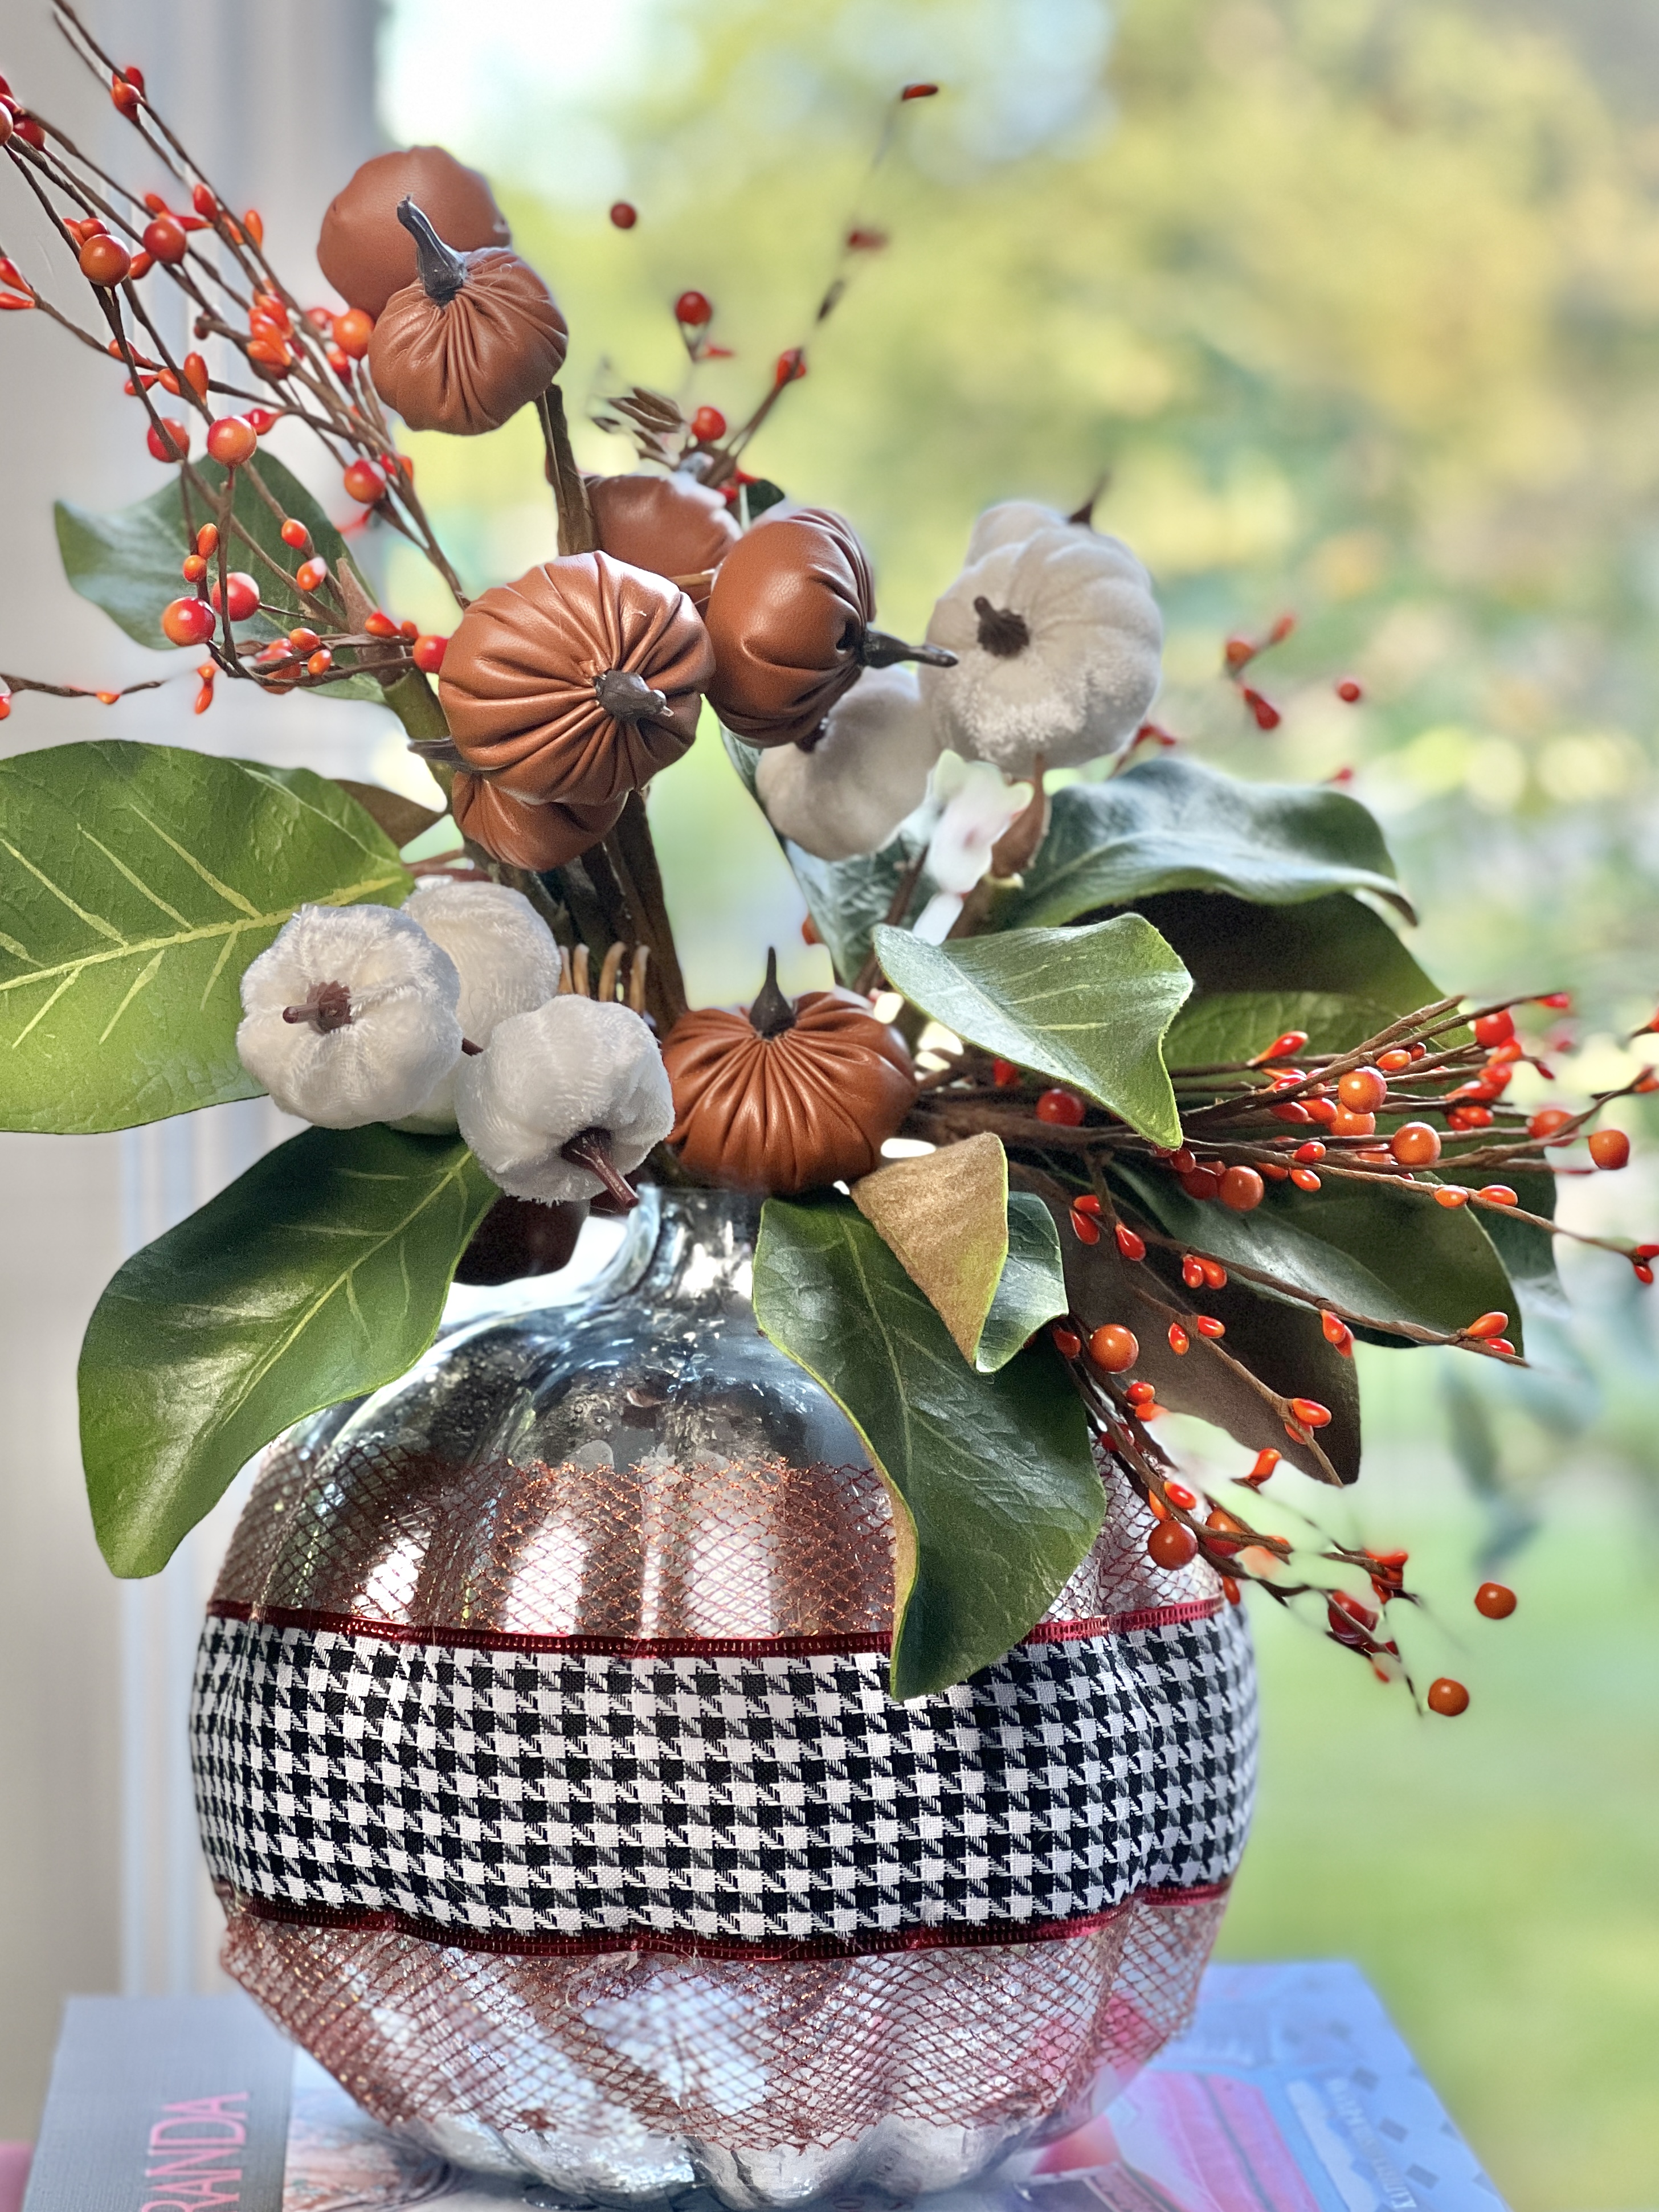 The completed DIY Pumpkin vase with ribbon, velvet and leather pumpkins, and magnolia leaves.